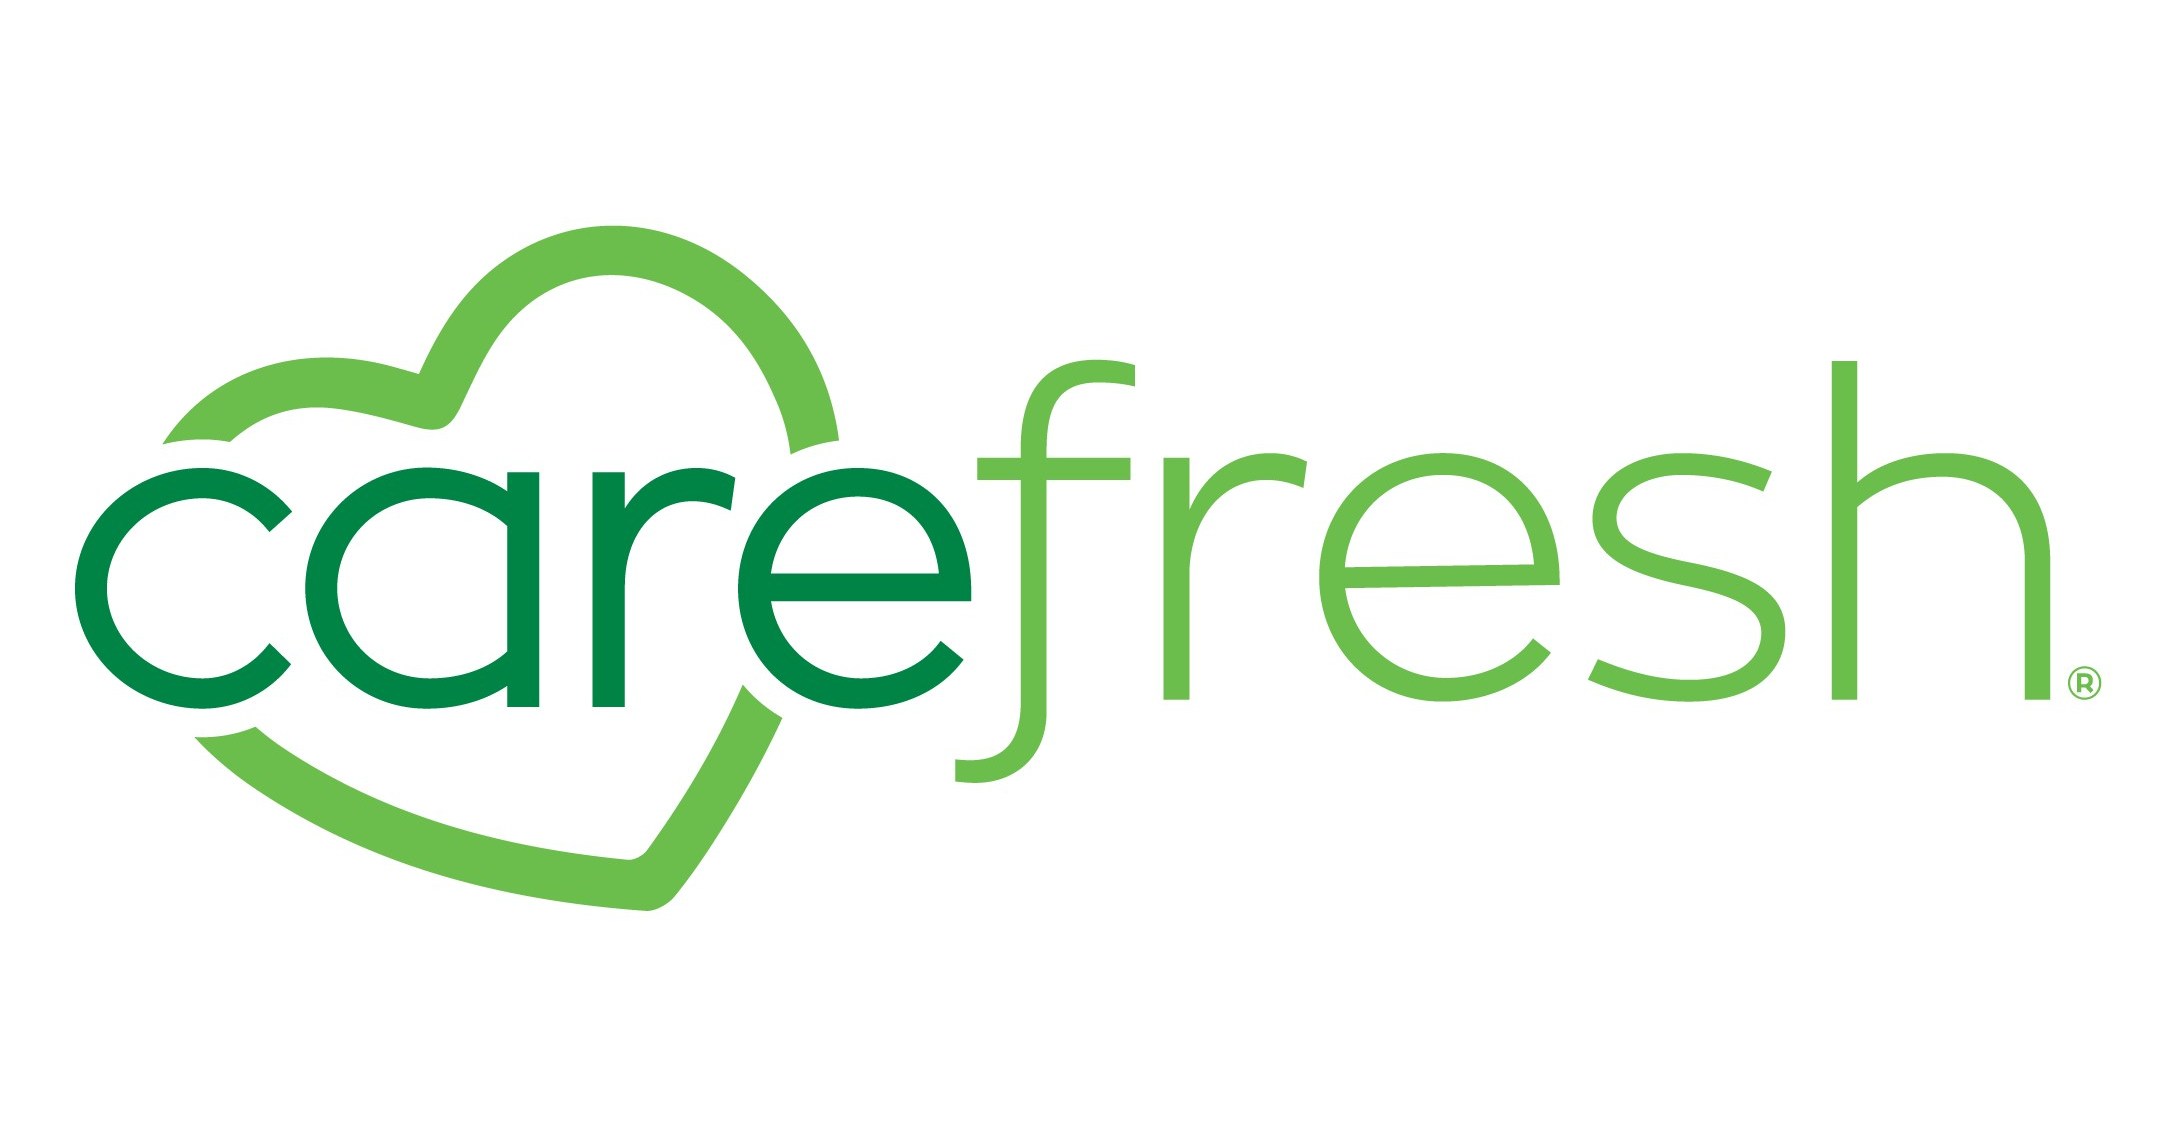 carefresh Announces Winning Shelters of Annual carefresh Gives Back Program